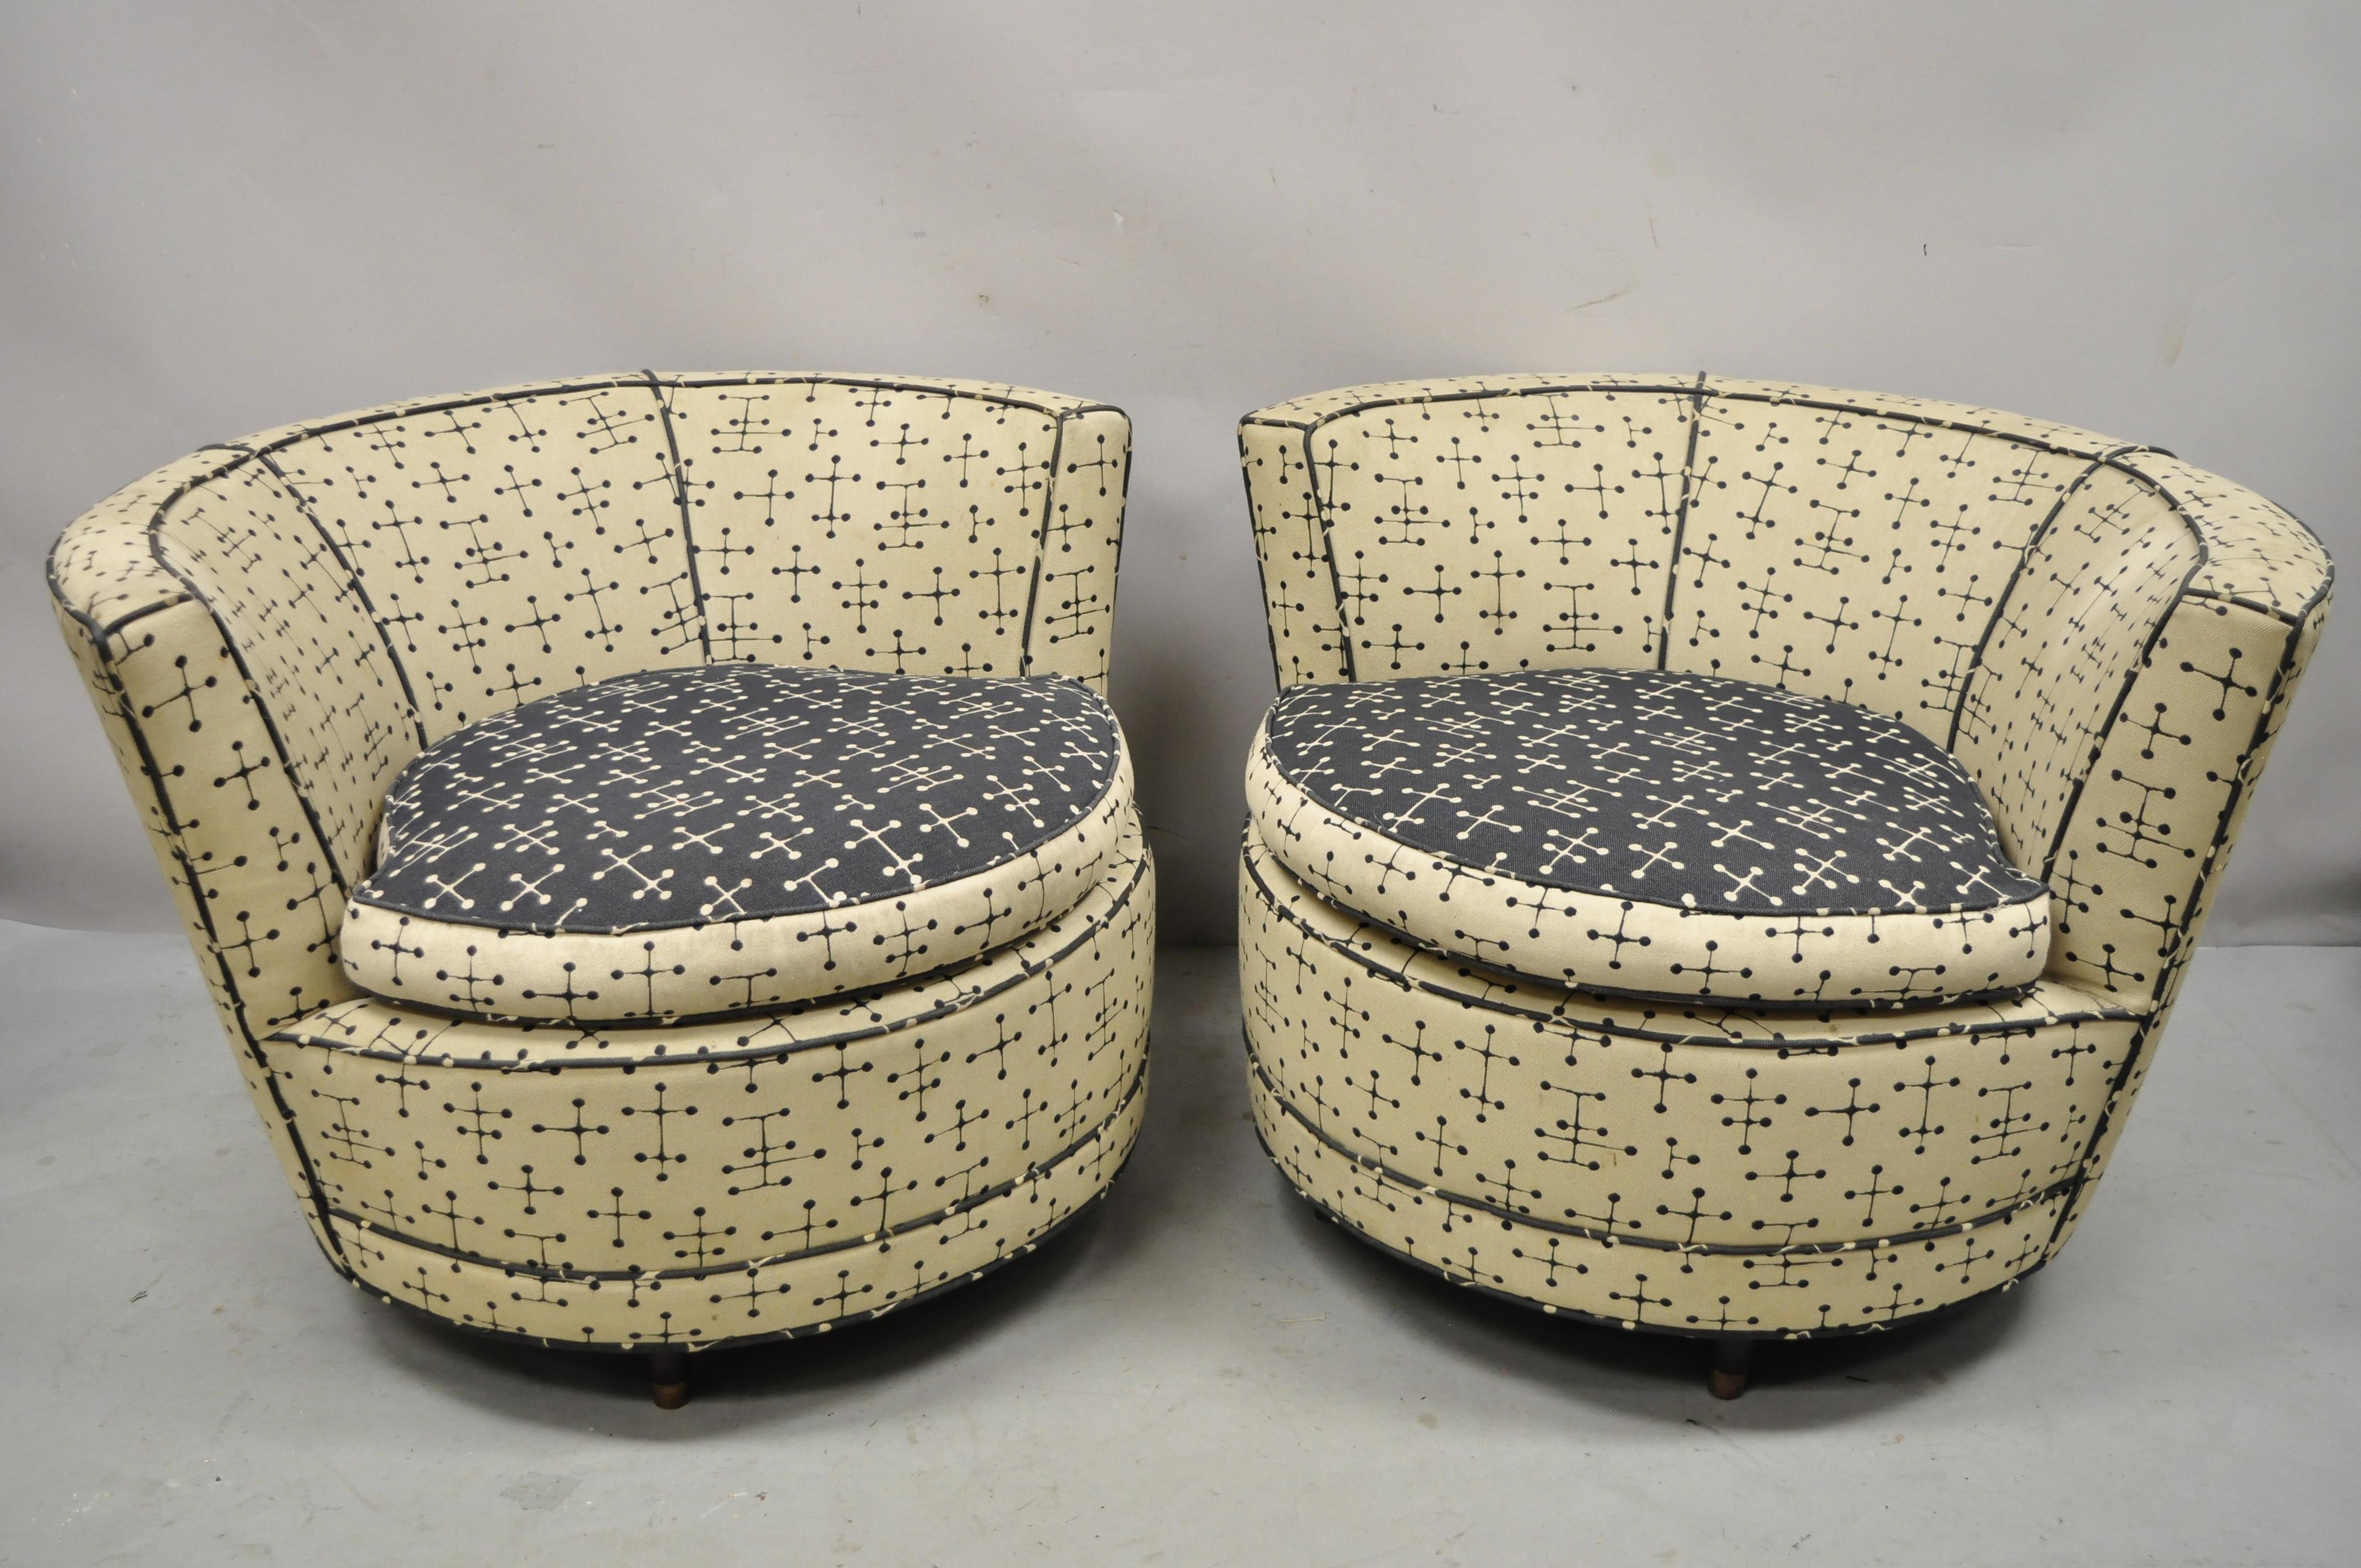 Vintage Mid-Century Modern large round upholstered Pearsall style club lounge chairs - a pair. Item features large round frames, short tapered legs, upholstered frames, very nice vintage pair, clean modernist lines, great style and form. Circa mid